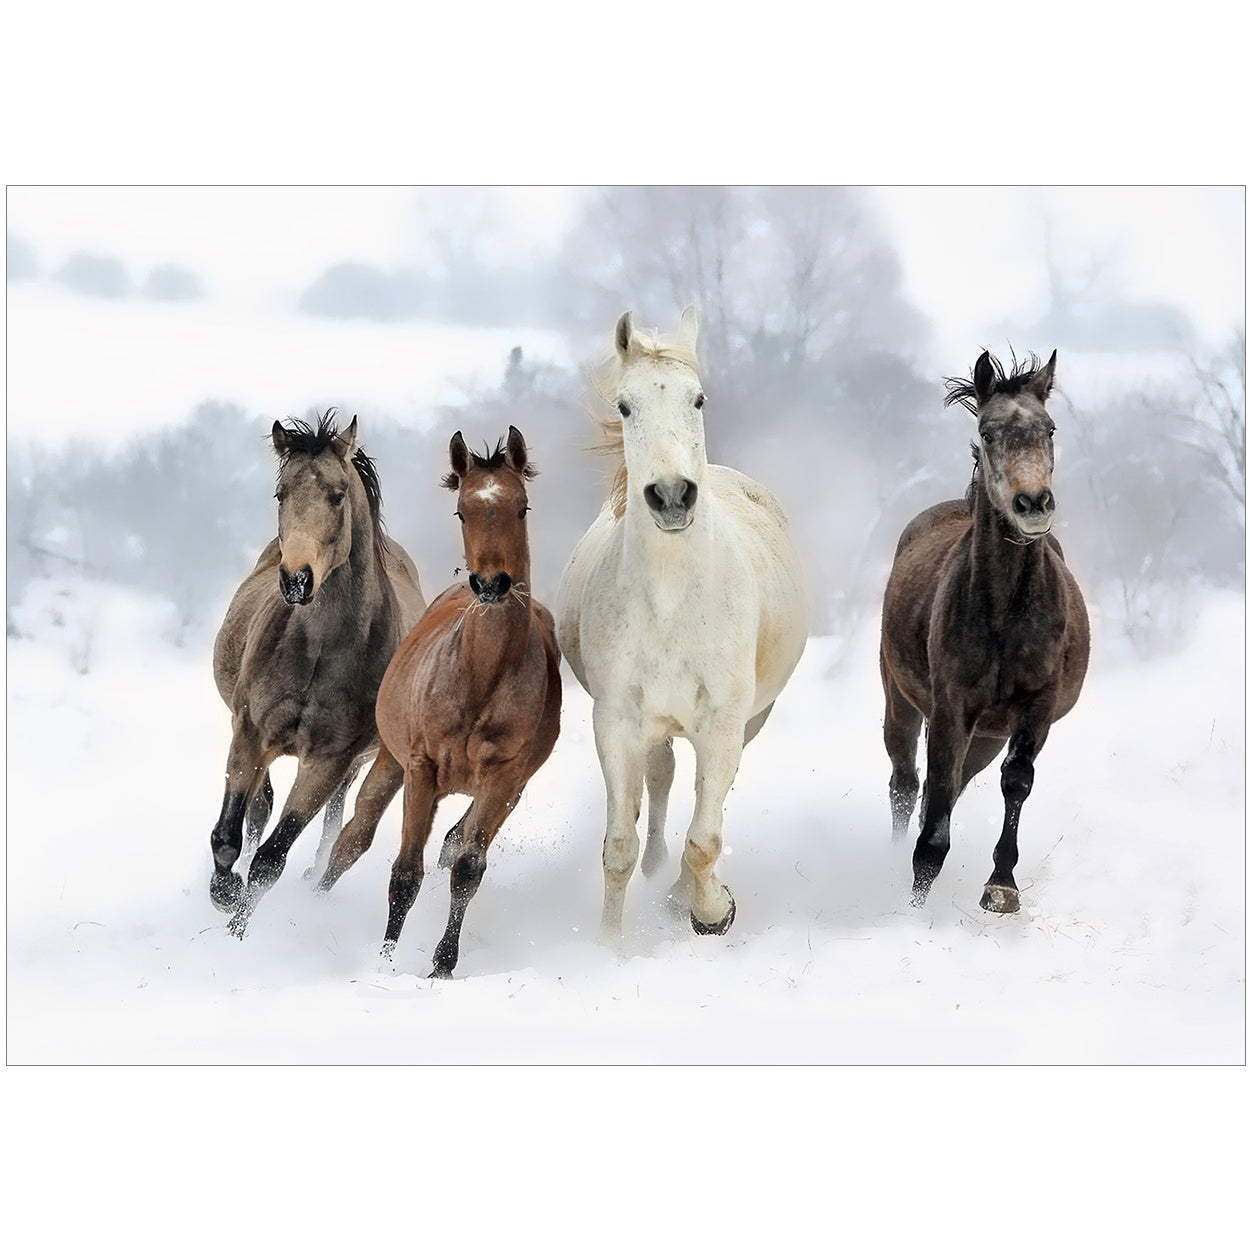 20 Blank Equestrian Greeting Cards - Pack H13